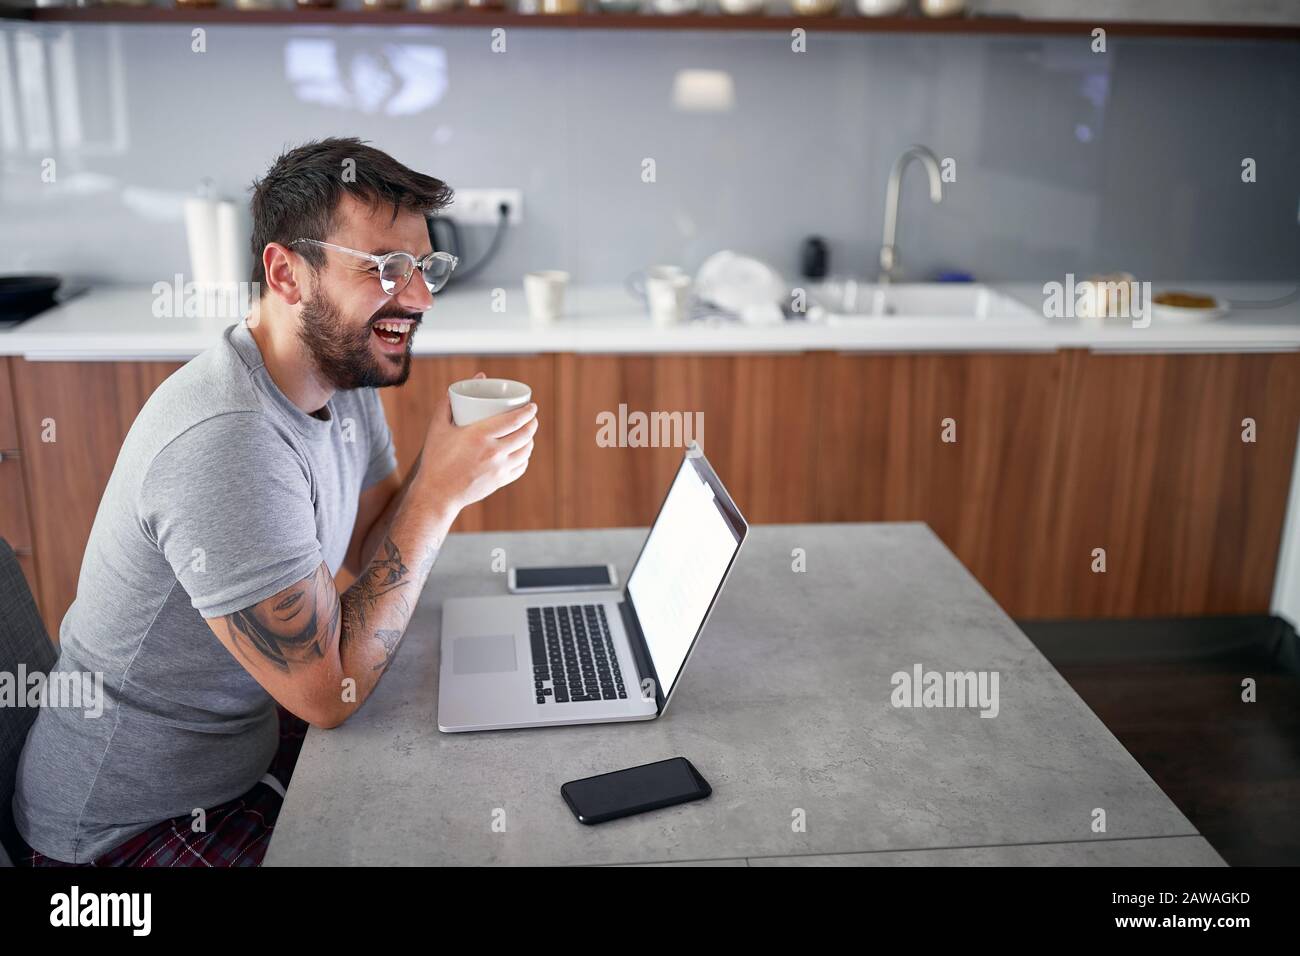 adult young male with beard wearing glasses,  smiling  in front of laptop on table, holding a cup. modern, casual, lifestyle, business concept Stock Photo